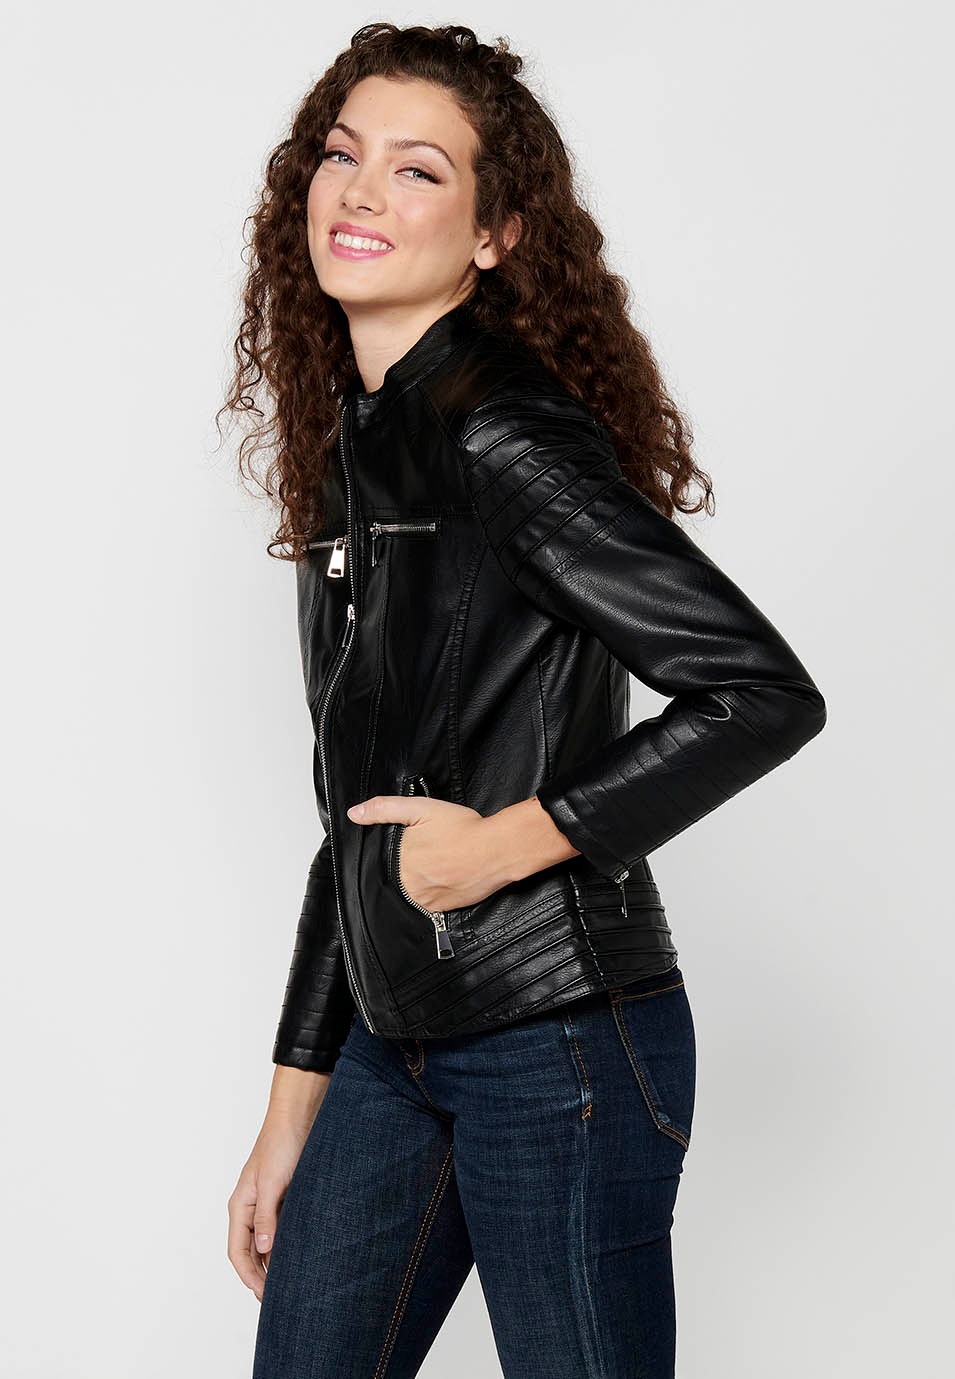 Long-sleeved jacket with zipper front closure and mandarin collar with details on the sleeves and shoulders in Black for Women 1